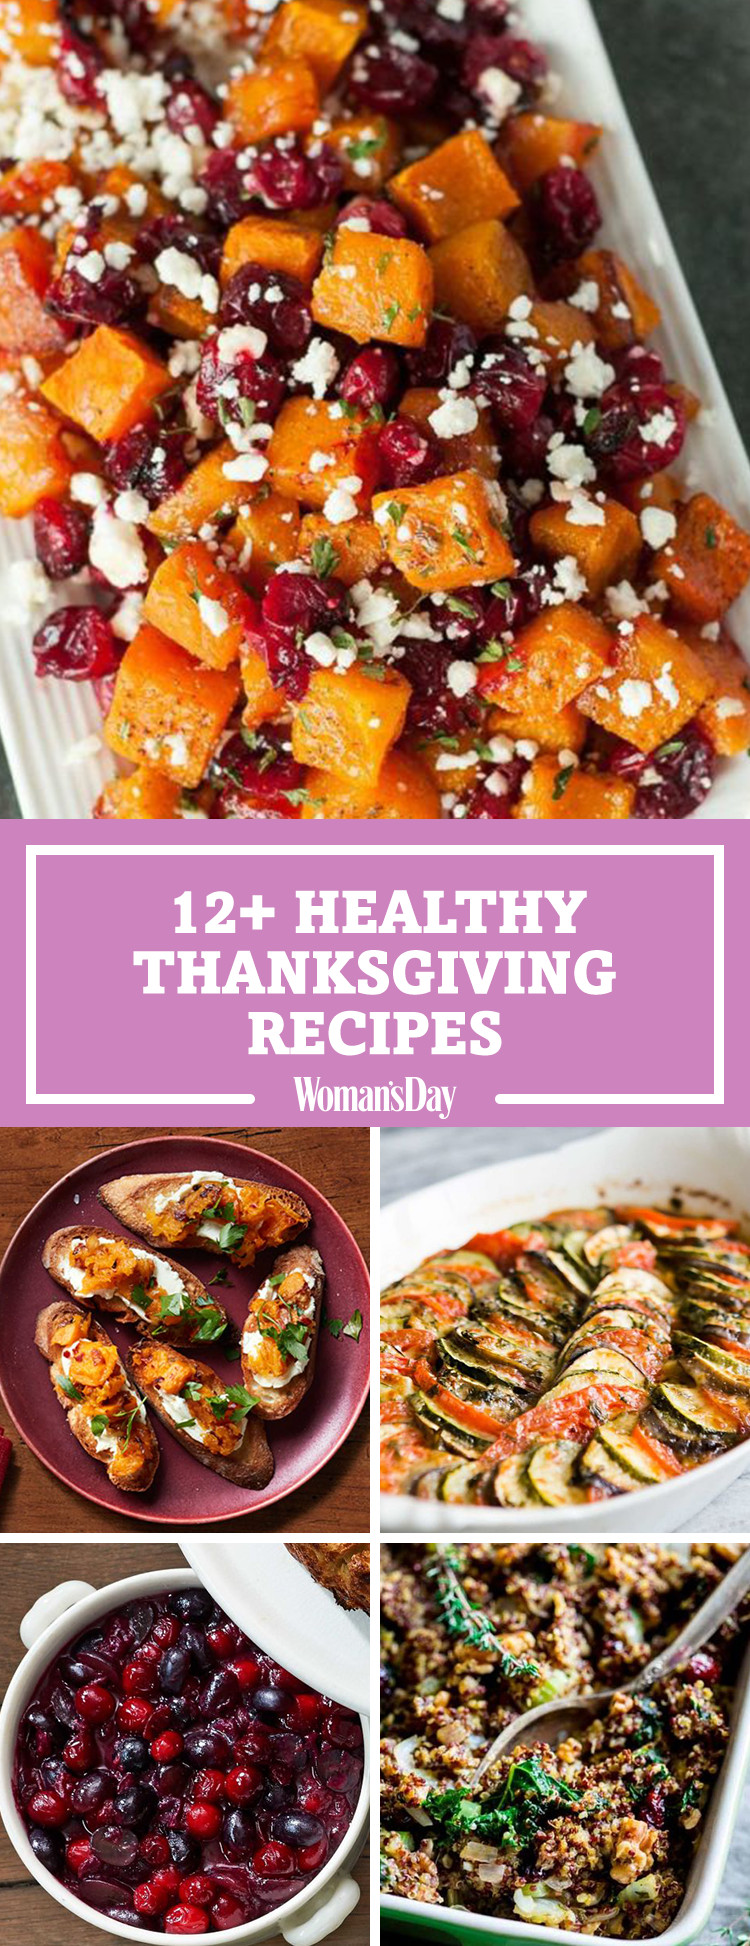 Healthy Thanksgiving Recipes
 16 Healthy Thanksgiving Dinner Recipes Healthier Sides